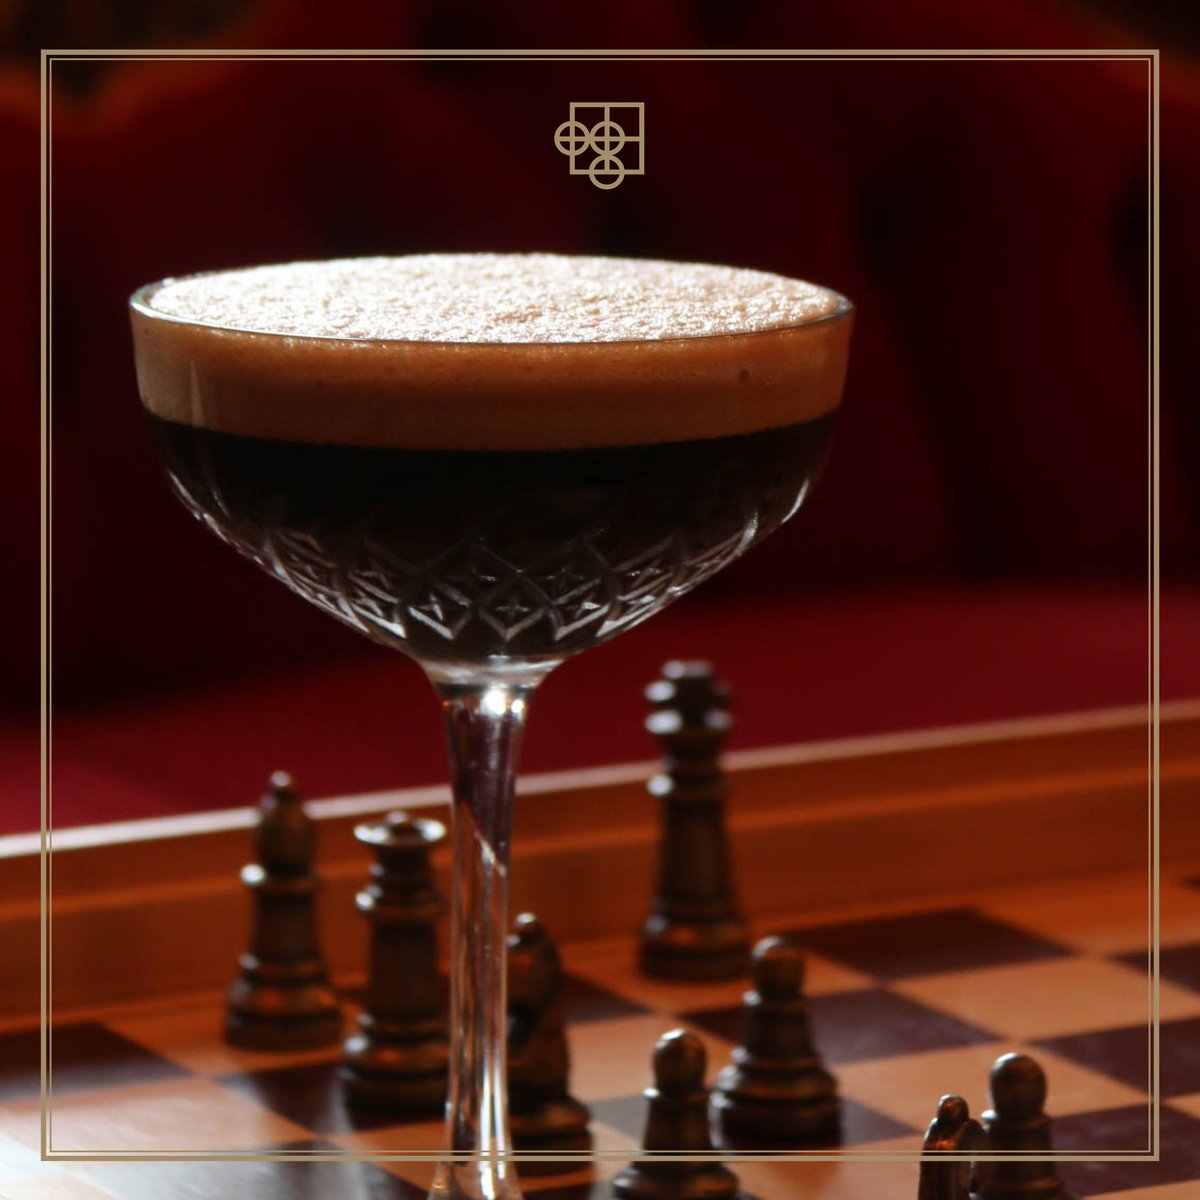 Espresso Martini...Party starter or late night after? We make ours with Cazcabel coffee tequila rather than the traditional vodka mix - it makes it much more silky and give a thicker creme, not to mention that tequila makes everyone happy!